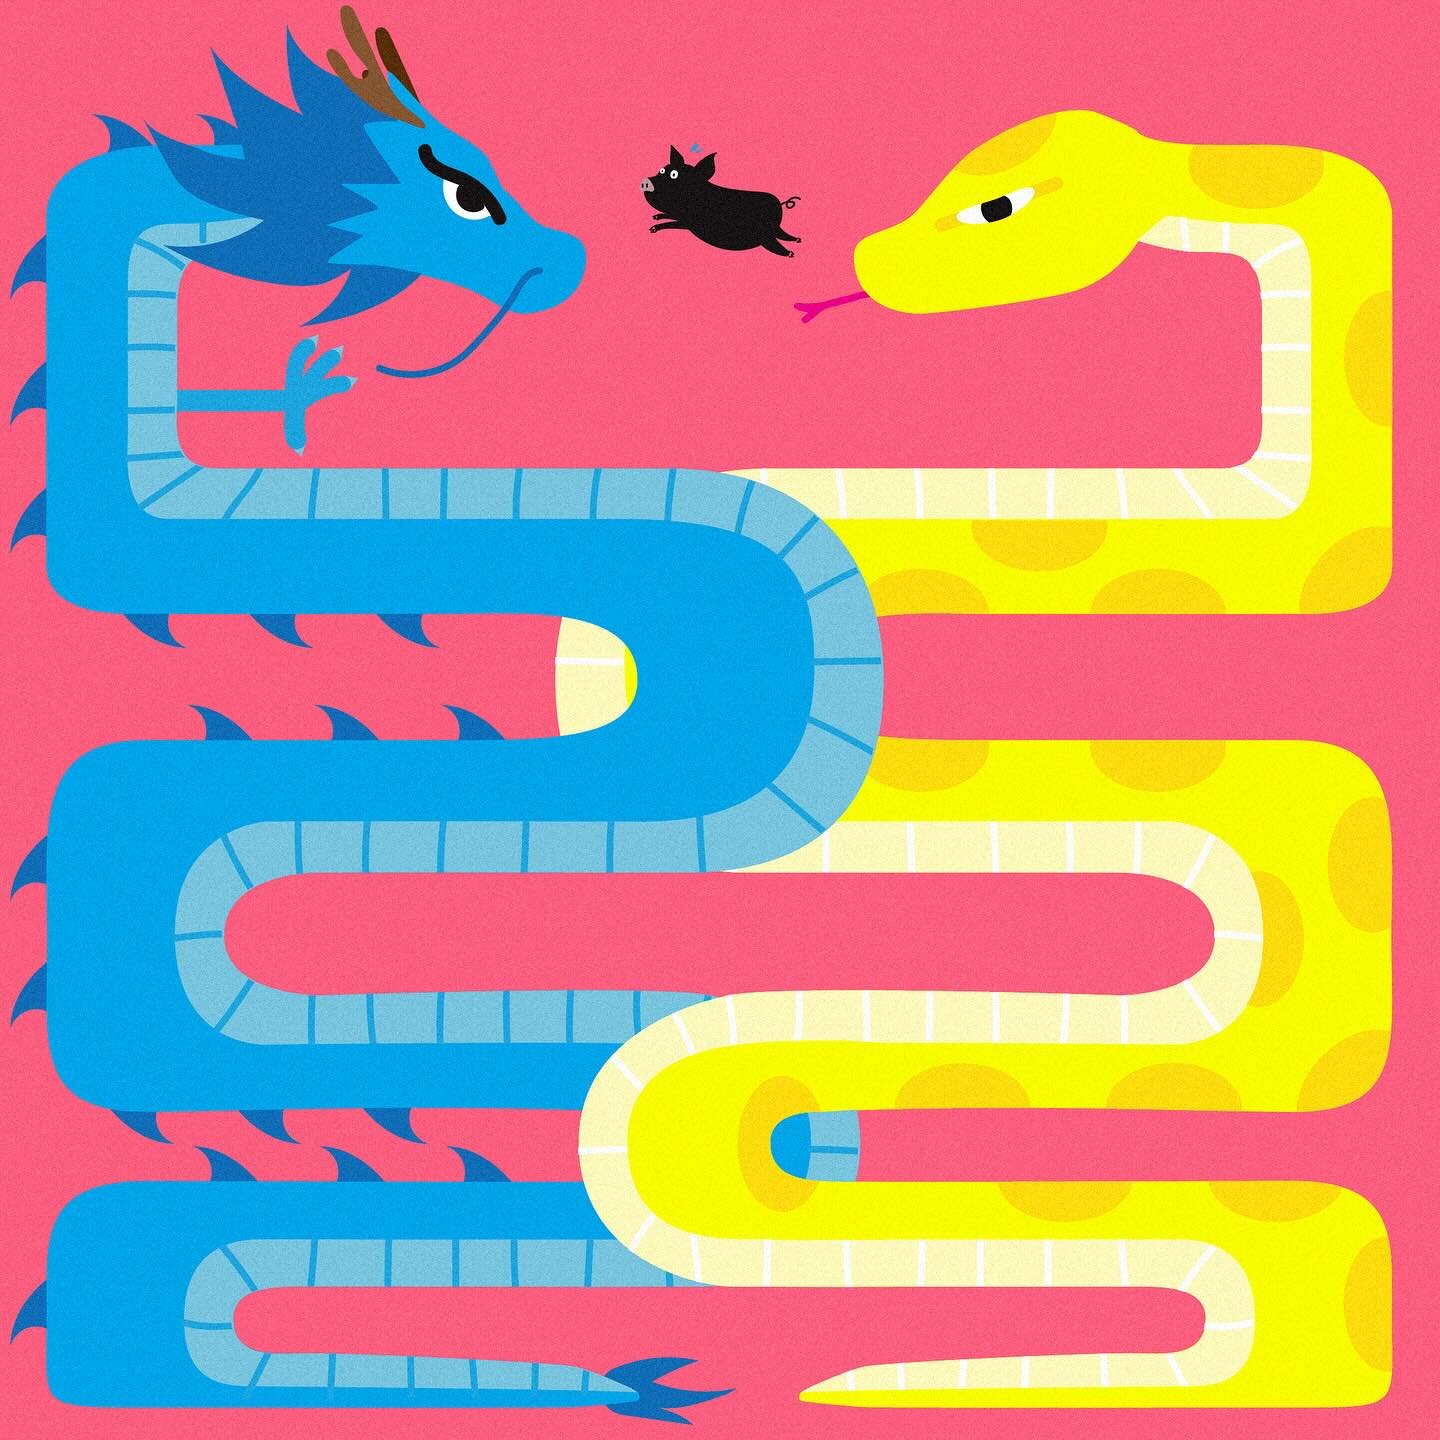 Meet my family as Asian zodiac signs.
Blue Dragon is our soon-to-be born child🐲
The yellow snake is Yoon, my wife🐍
The black pig is me🐷
As you may noticed, The composition implicates the power hierarchy of our family👨&zwj;👩&zwj;👦 #TheNiceGaller